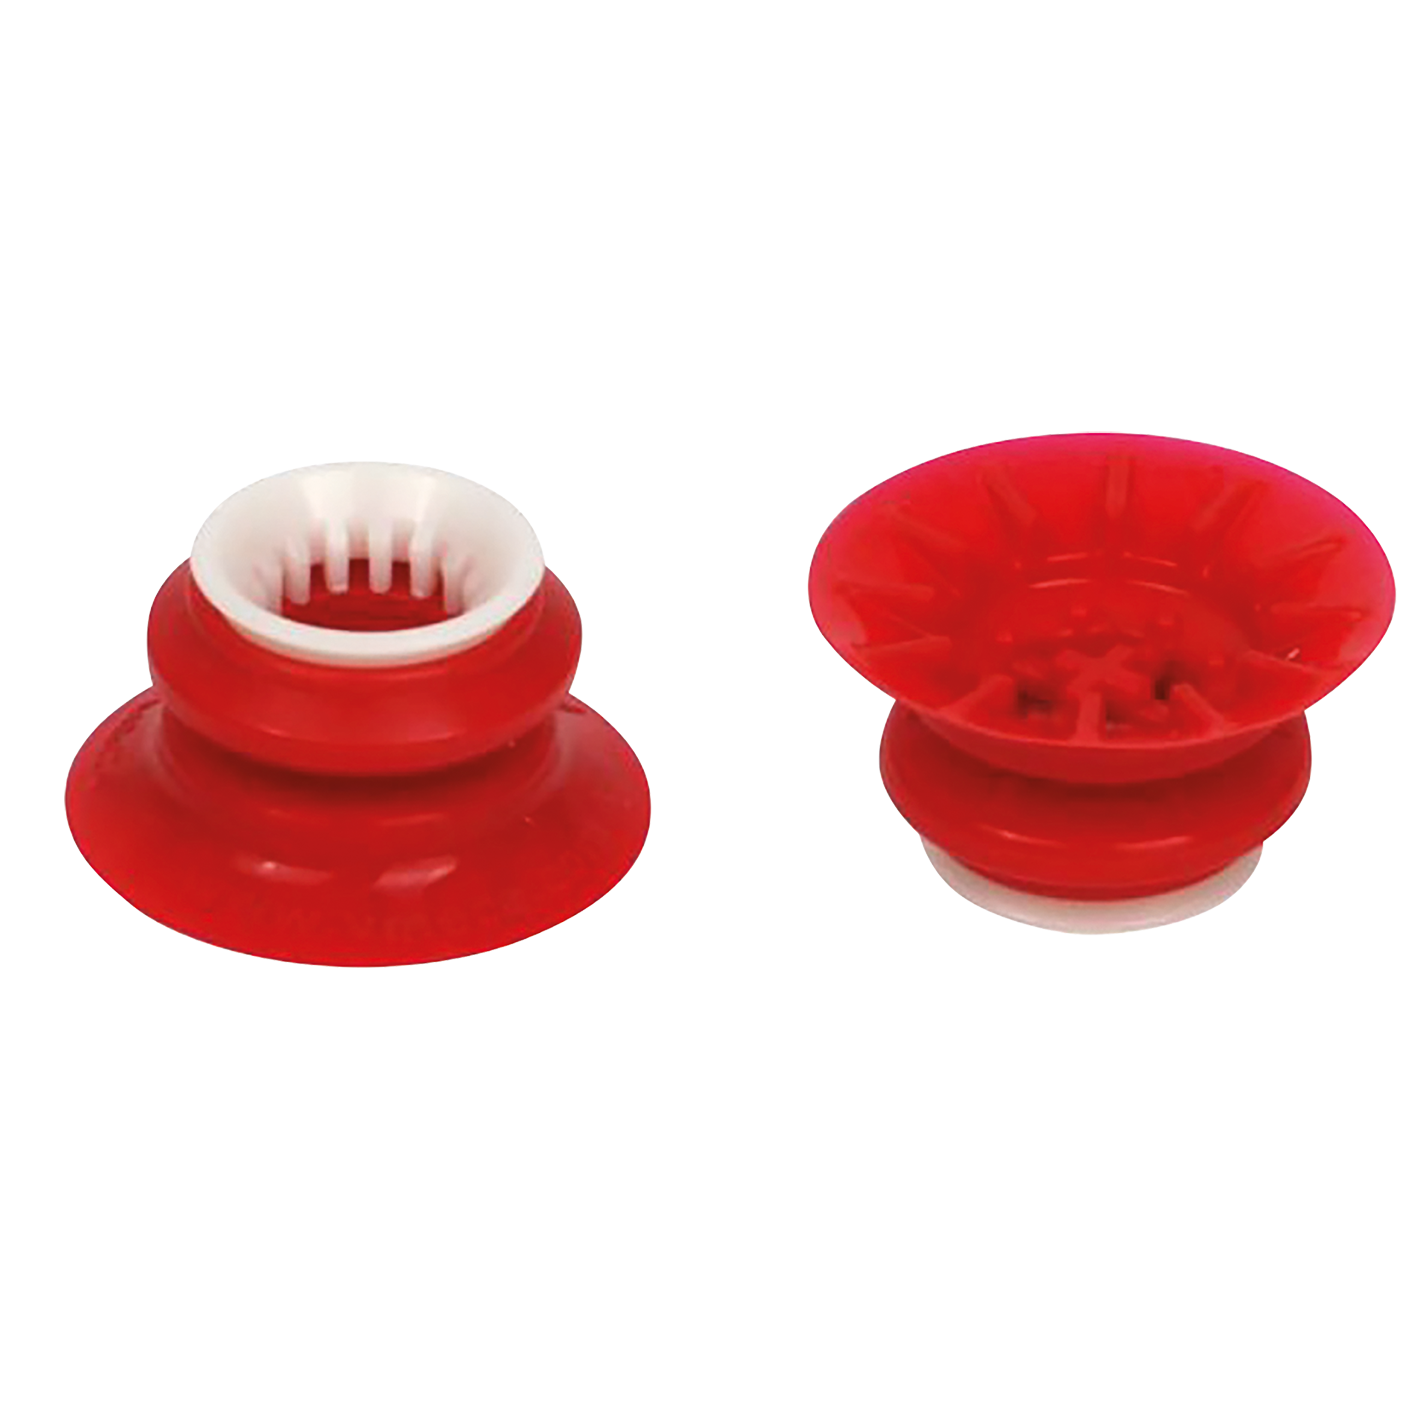 SUCTION LIP FOR P TYPE CUP 15MM DIAMETER